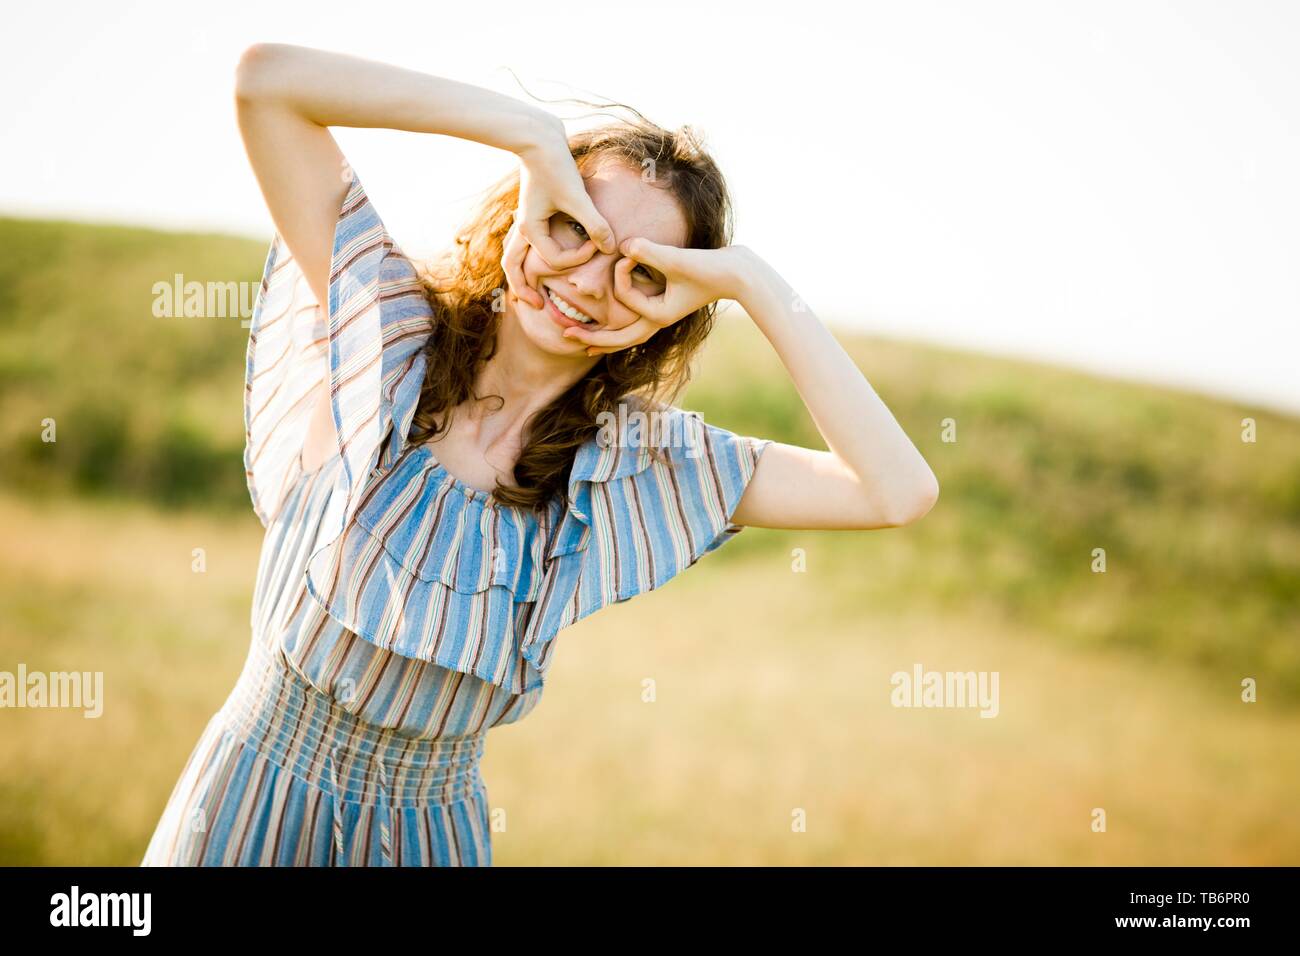 Young pilot girl pretending flying using fake glasses and vintage helmet, on a meadow Stock Photo